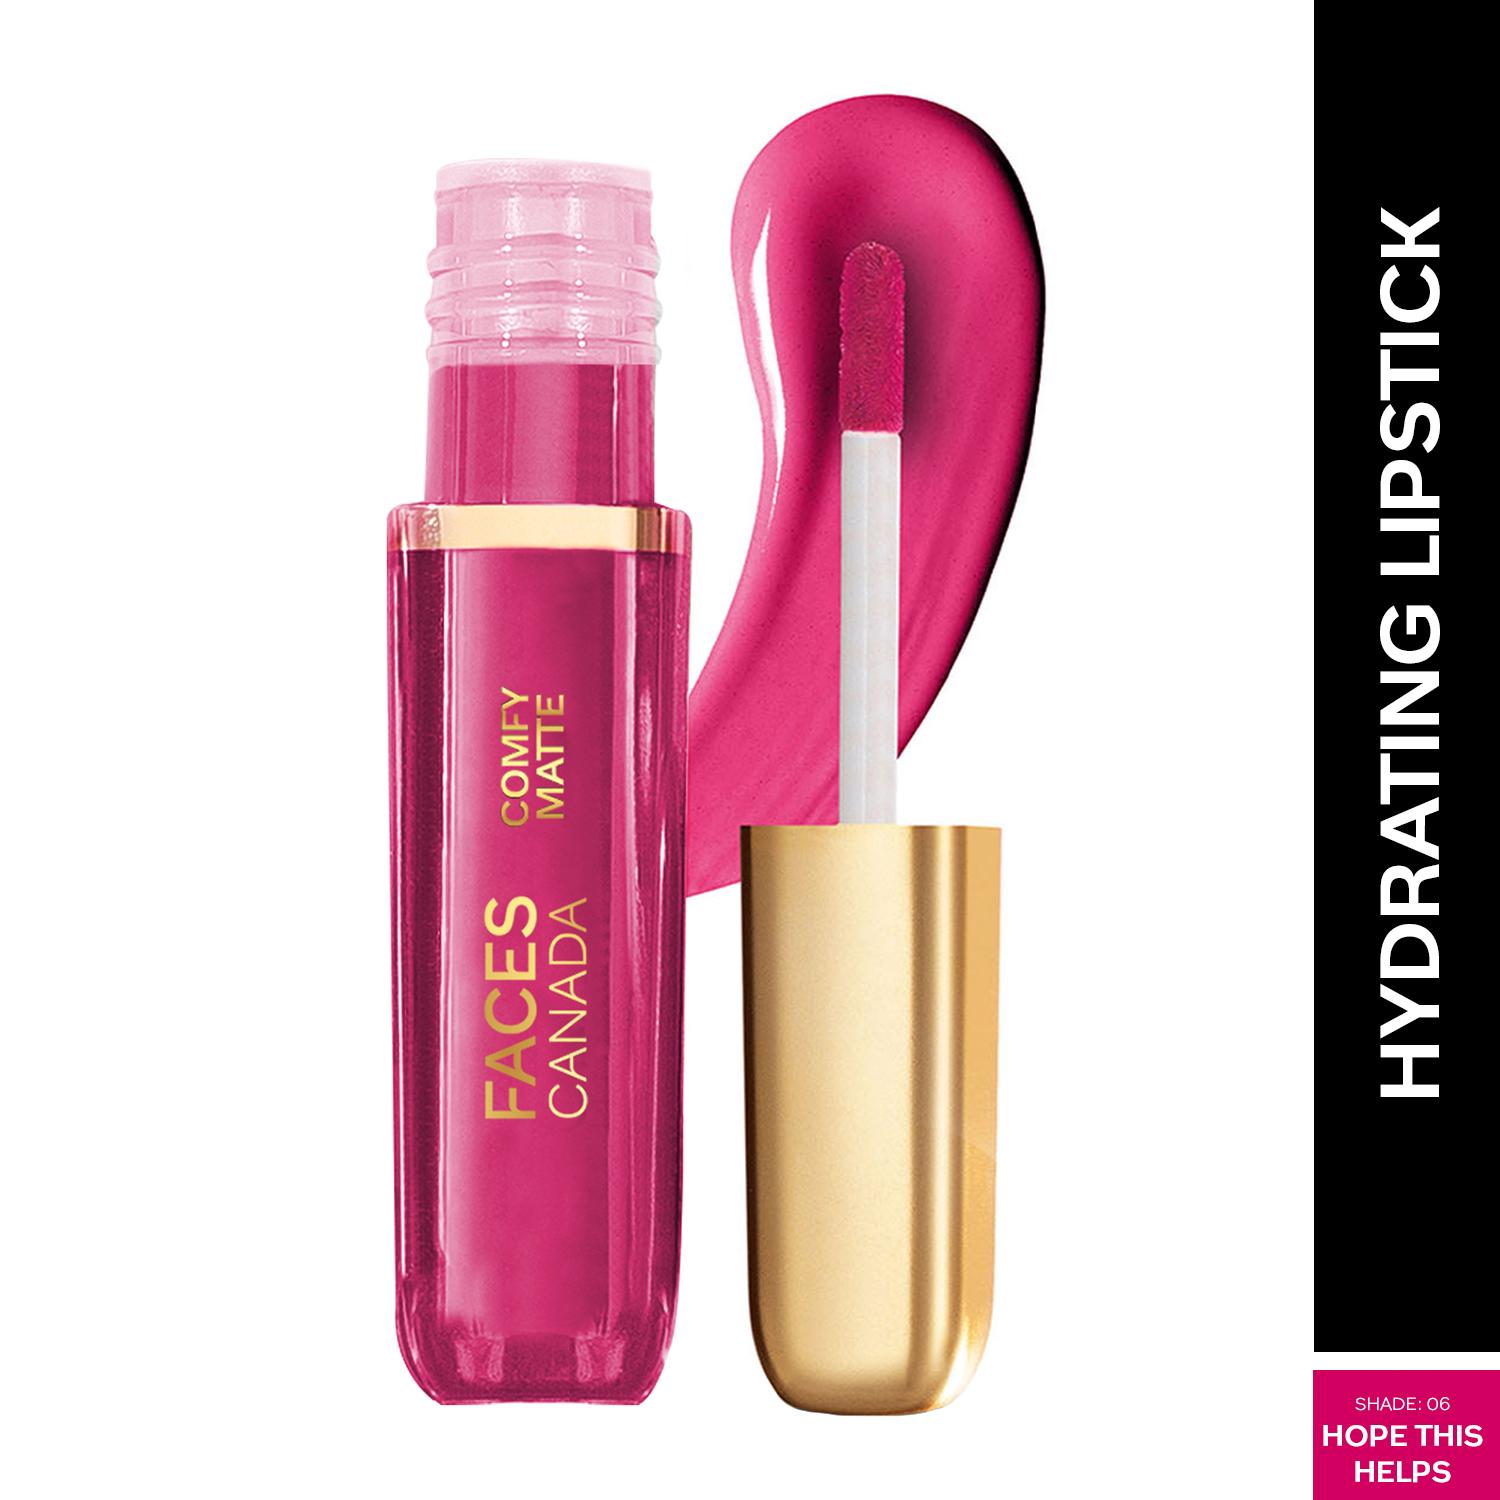 Faces Canada | Faces Canada Comfy Matte Liquid Lipstick, 10HR Stay, No Dryness - Hope This Helps 06 (3 ml)